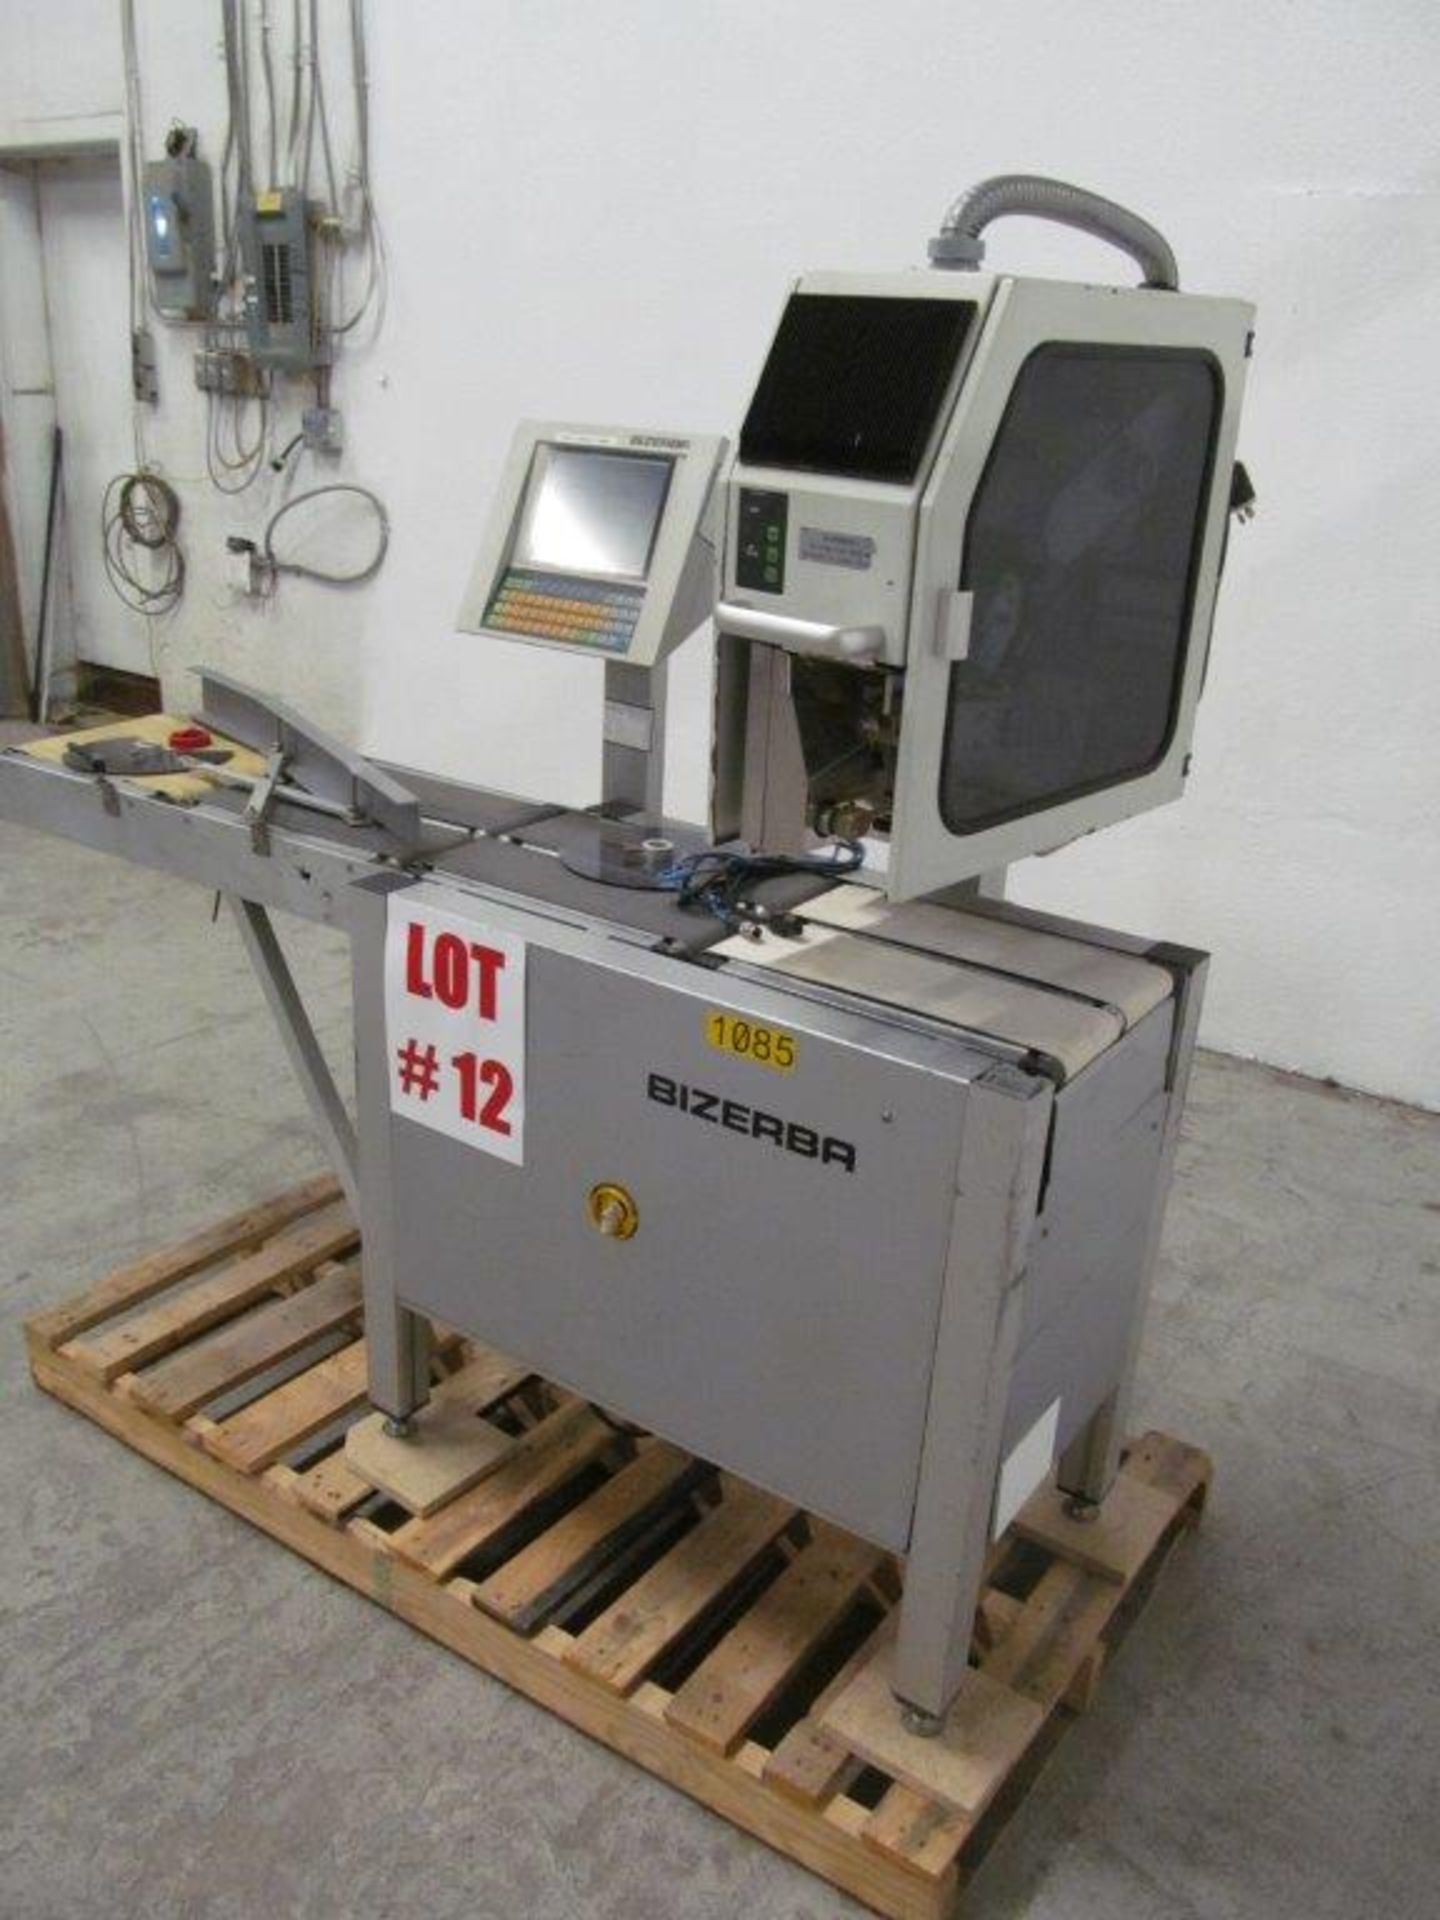 BIZERBA WEIGH LABELING EQUIPMENT MOD. GV, VOLTAGE : 120V / 60HZ / 2.4 AMP, WEIGHT: 500LBS, - Image 3 of 3